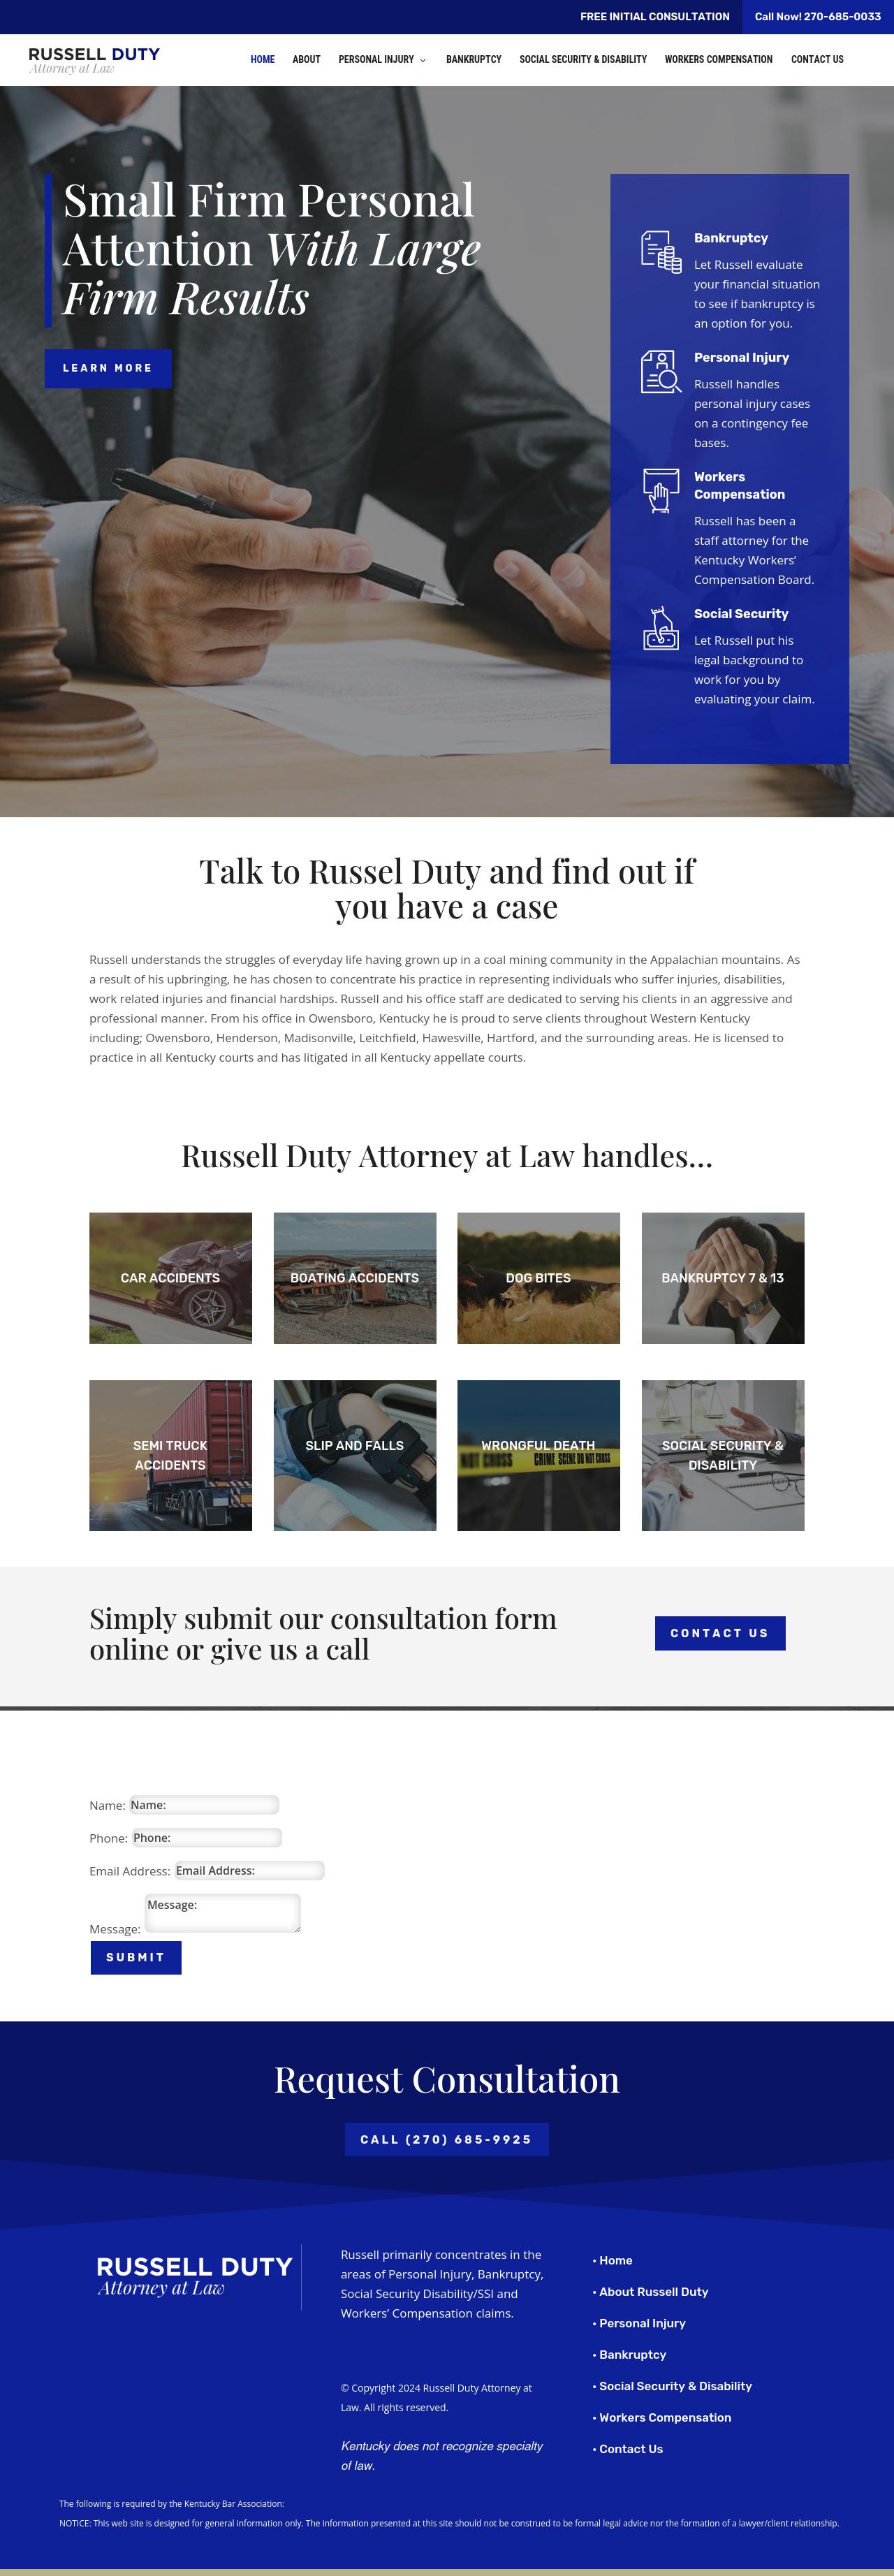 Russell Duty - Owensboro KY Lawyers